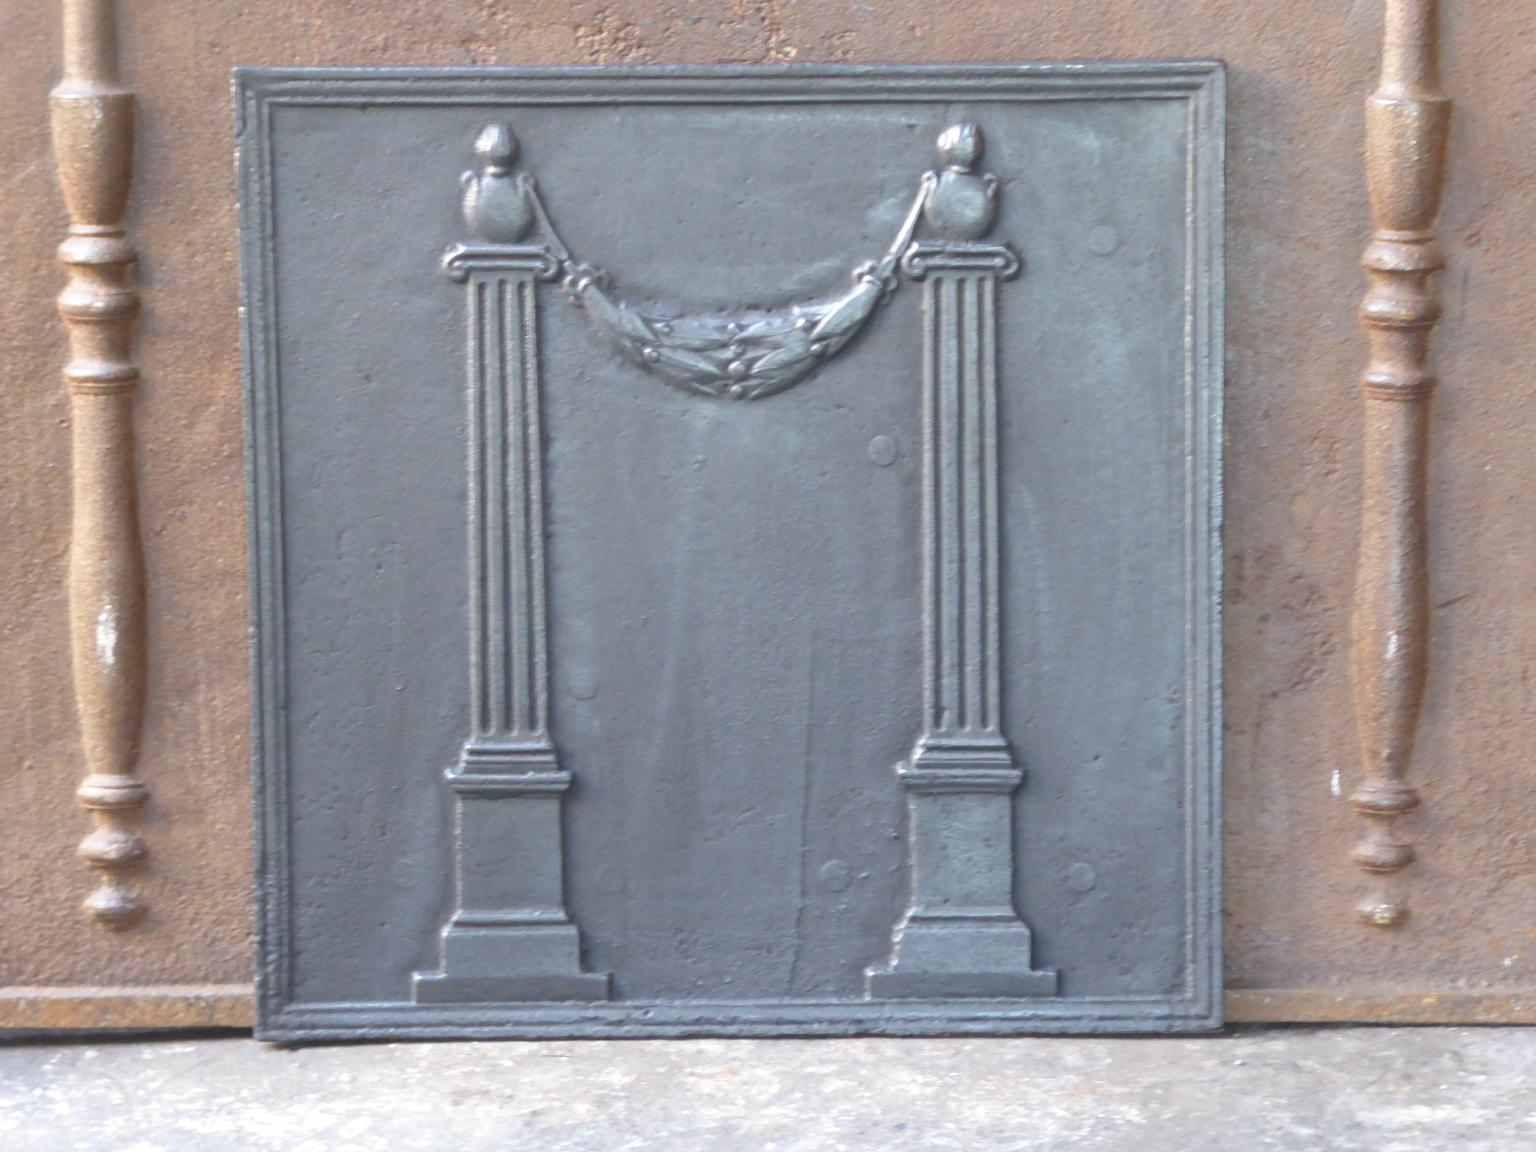 18th-19th century French neoclassical fireback with two pillars of Freedom. They symbolize one of the three values of the French Revolution, liberty.

The fireback is made of cast iron and has a black / pewter patina. It is in a good condition and